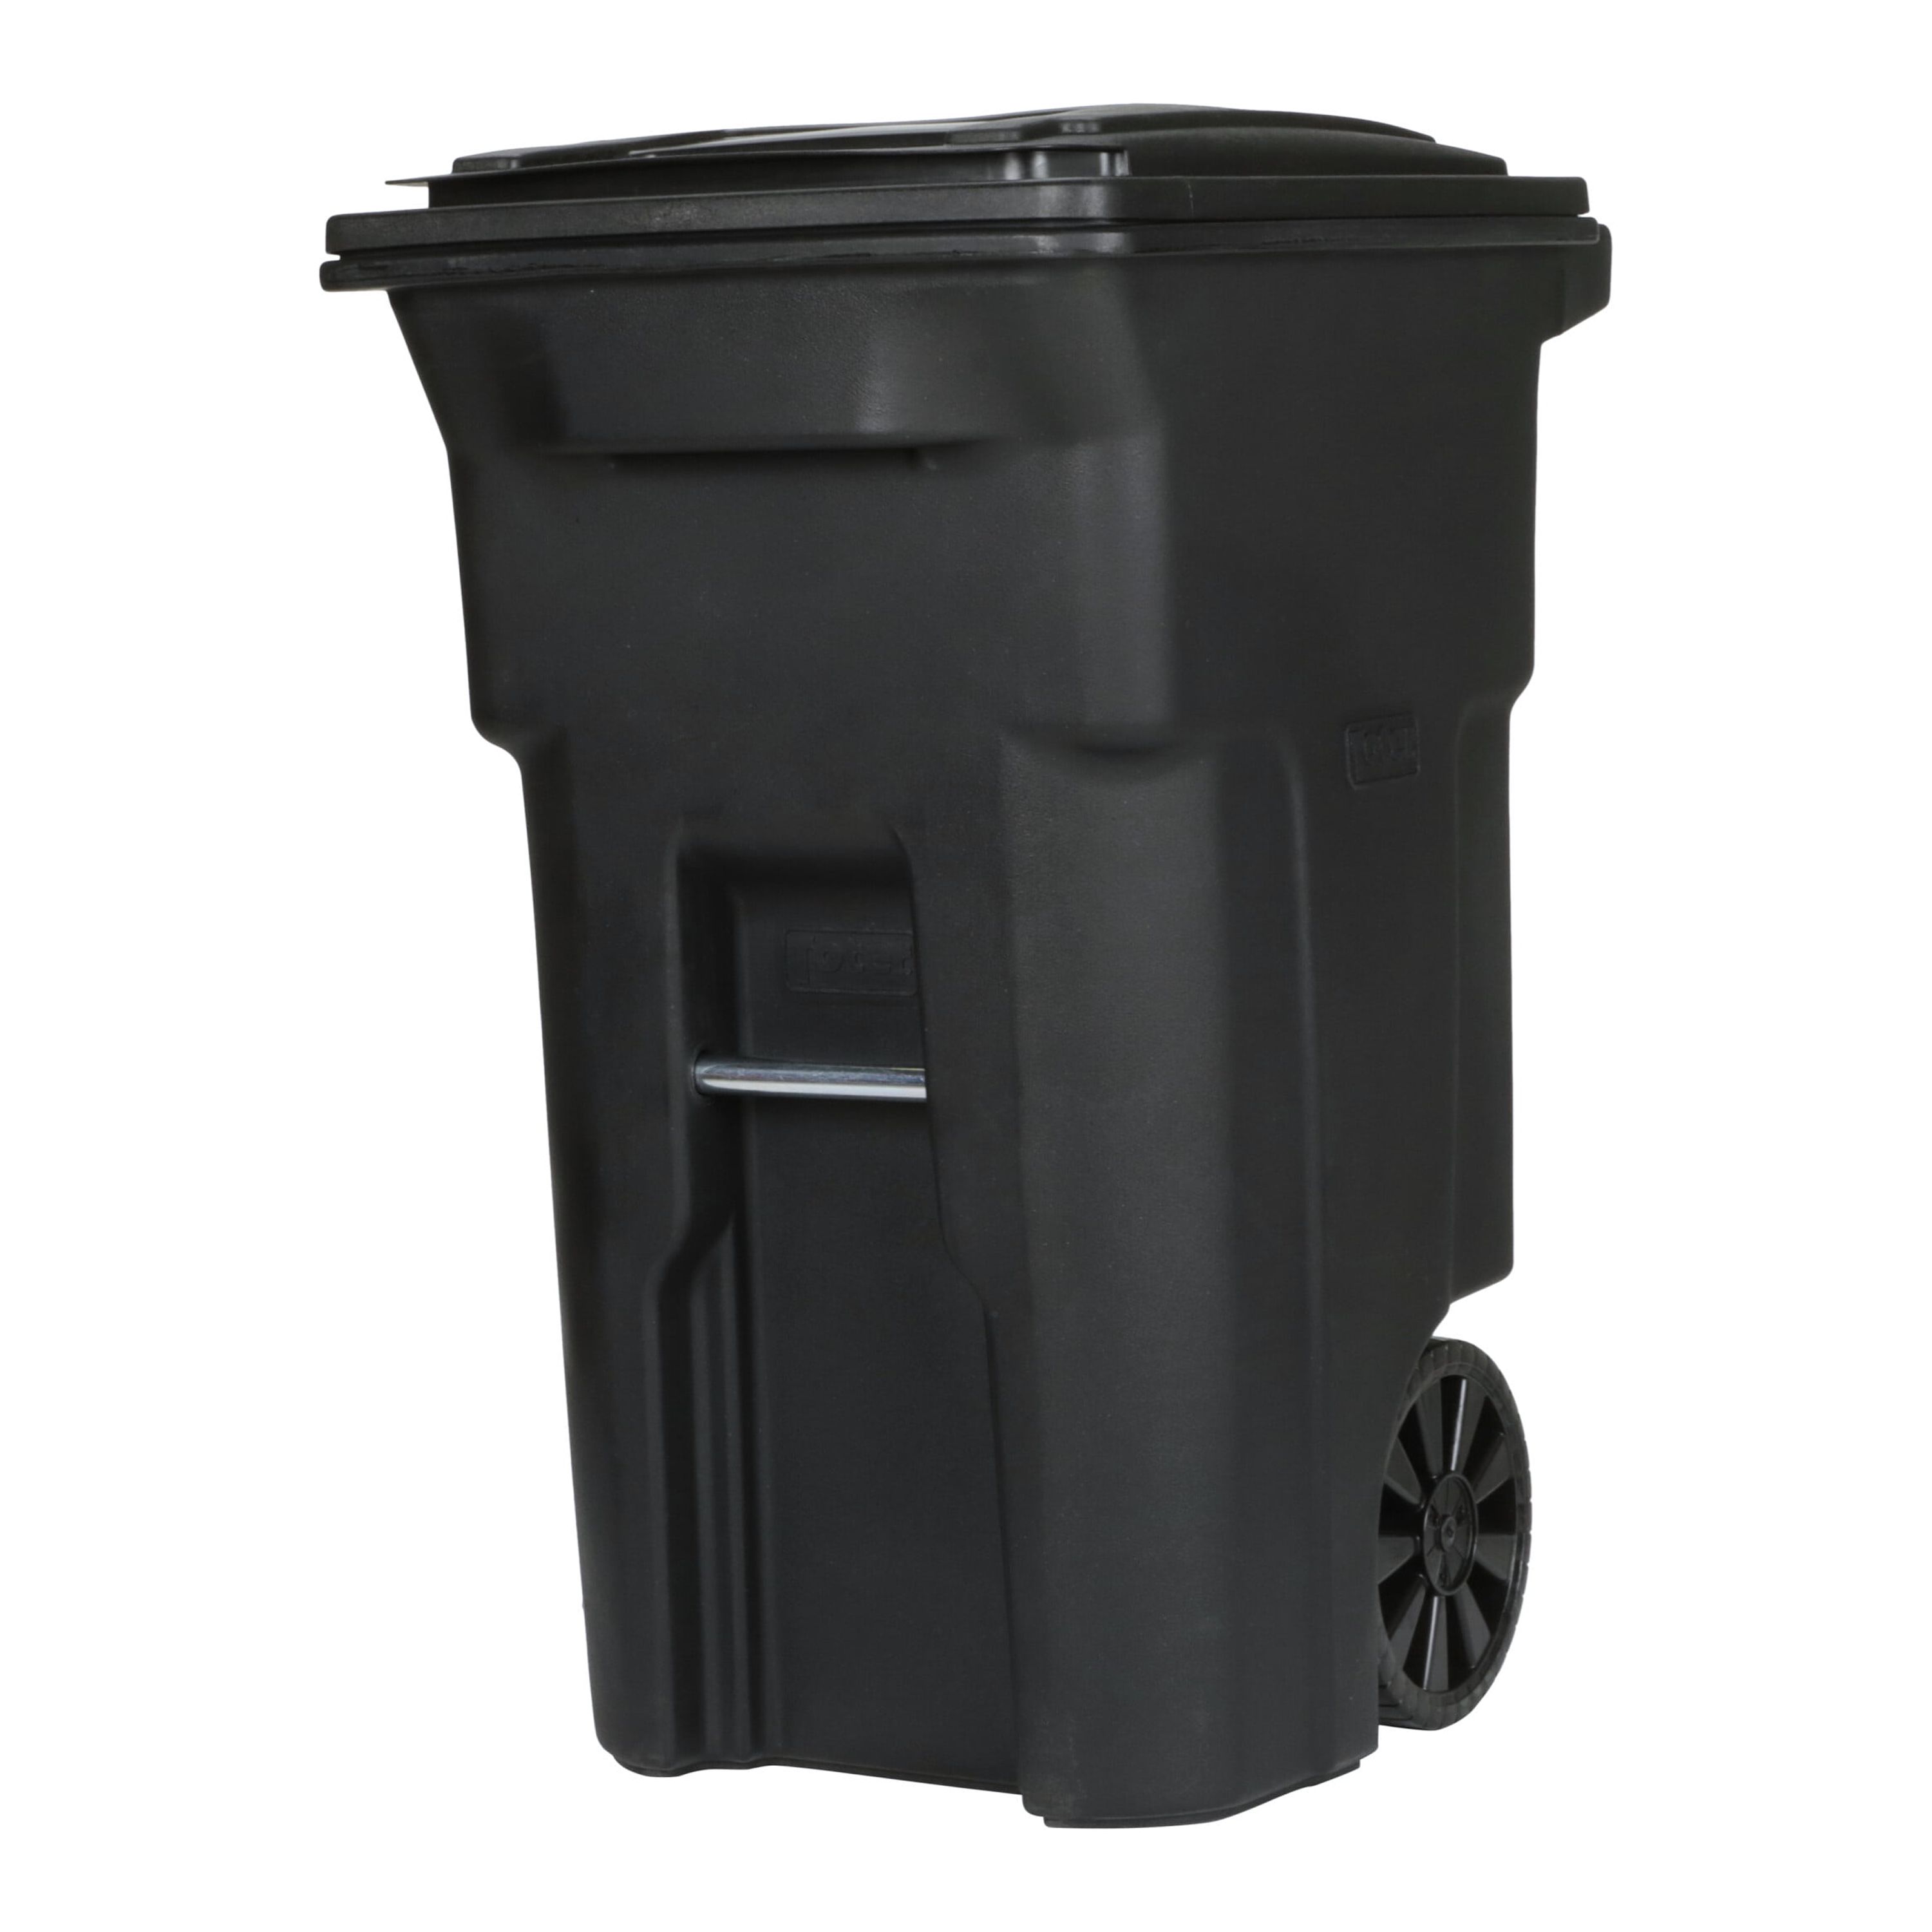 Toter 64 gallon black garbage can with wheels and lid - image 1 of 7